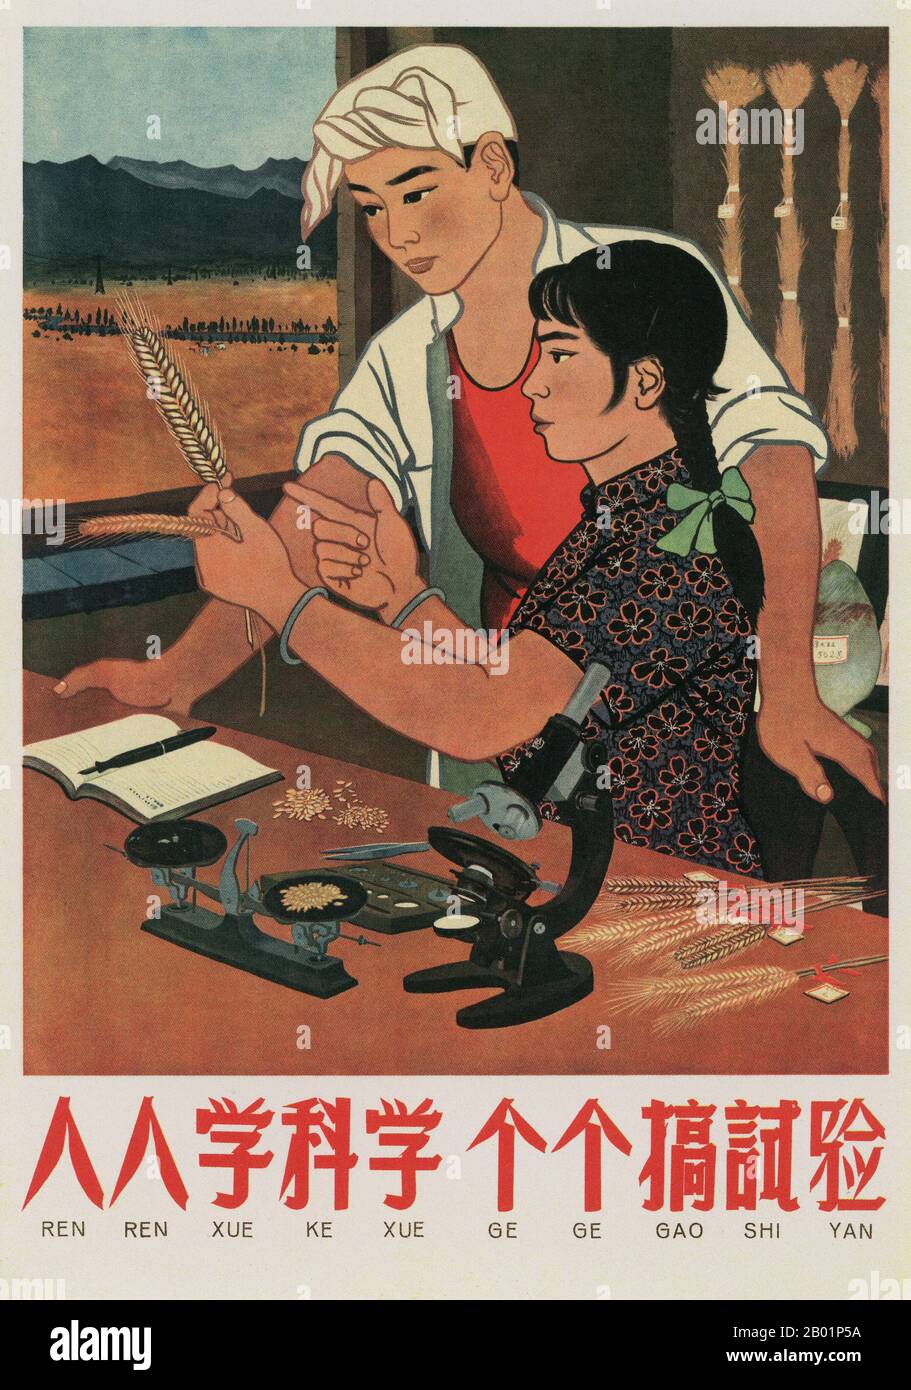 China: 'Everyone Should Study Science, Everyone Should Conduct Experiments'. Propaganda poster from the Great Leap Forward (1958-1961) by Zhao Wenfa, 1959.  The Great Leap Forward of the People's Republic of China (PRC) was an economic and social campaign of the Communist Party of China (CPC), reflected in planning decisions from 1958 to 1961, which aimed to use China's vast population to rapidly transform the country from an agrarian economy into a modern communist society through the process of rapid industrialisation, and collectivisation. Stock Photo